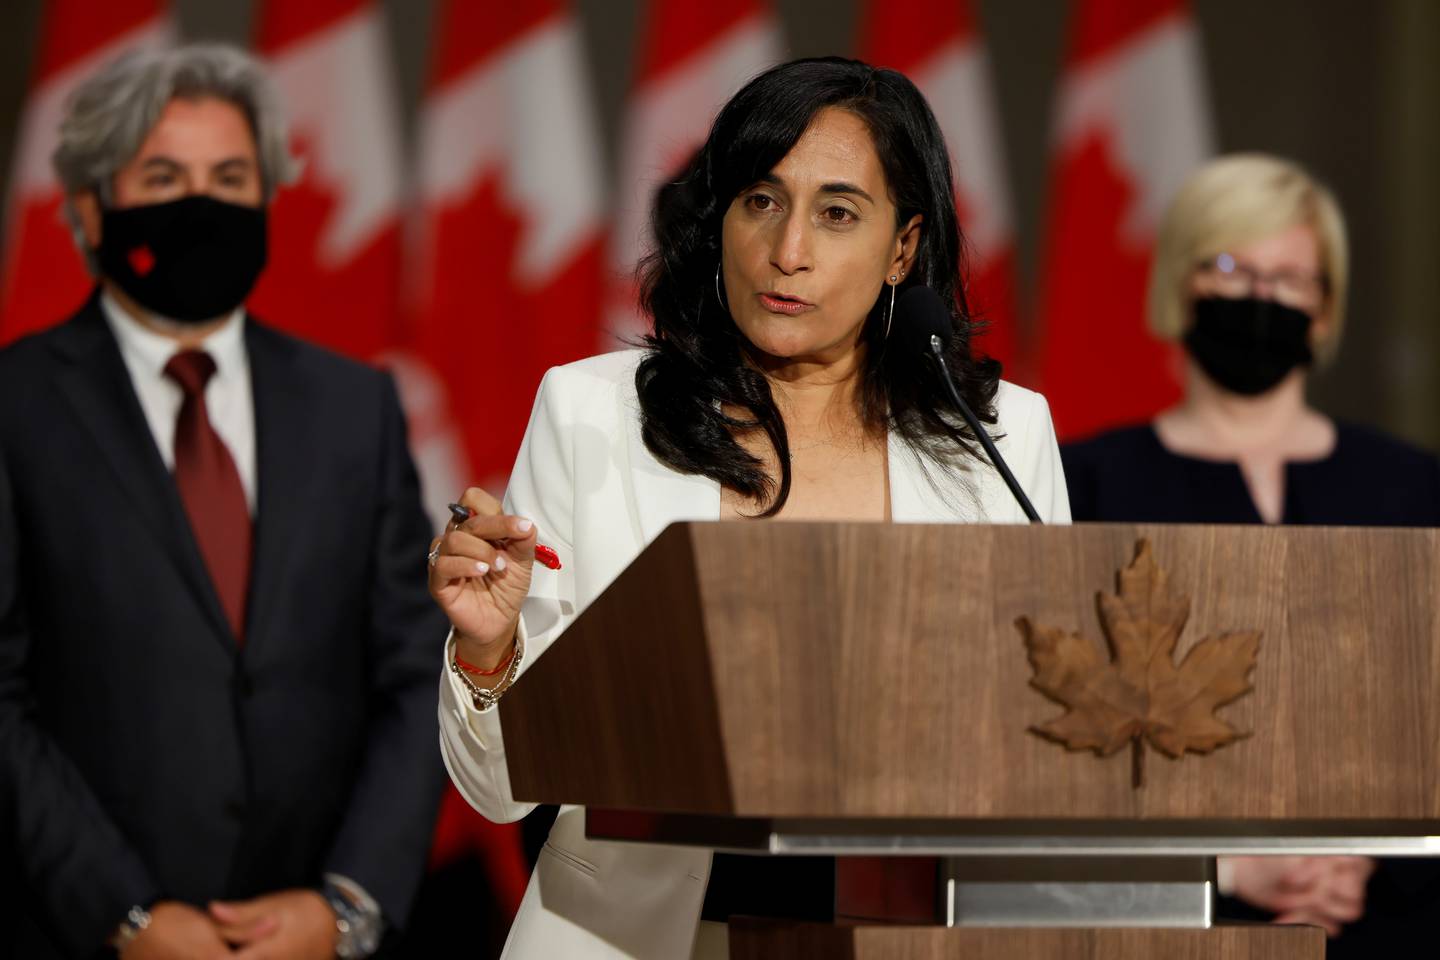 Though she has no military background, Anita Anand played an integral role in helping Canada navigate the pandemic. Reuters